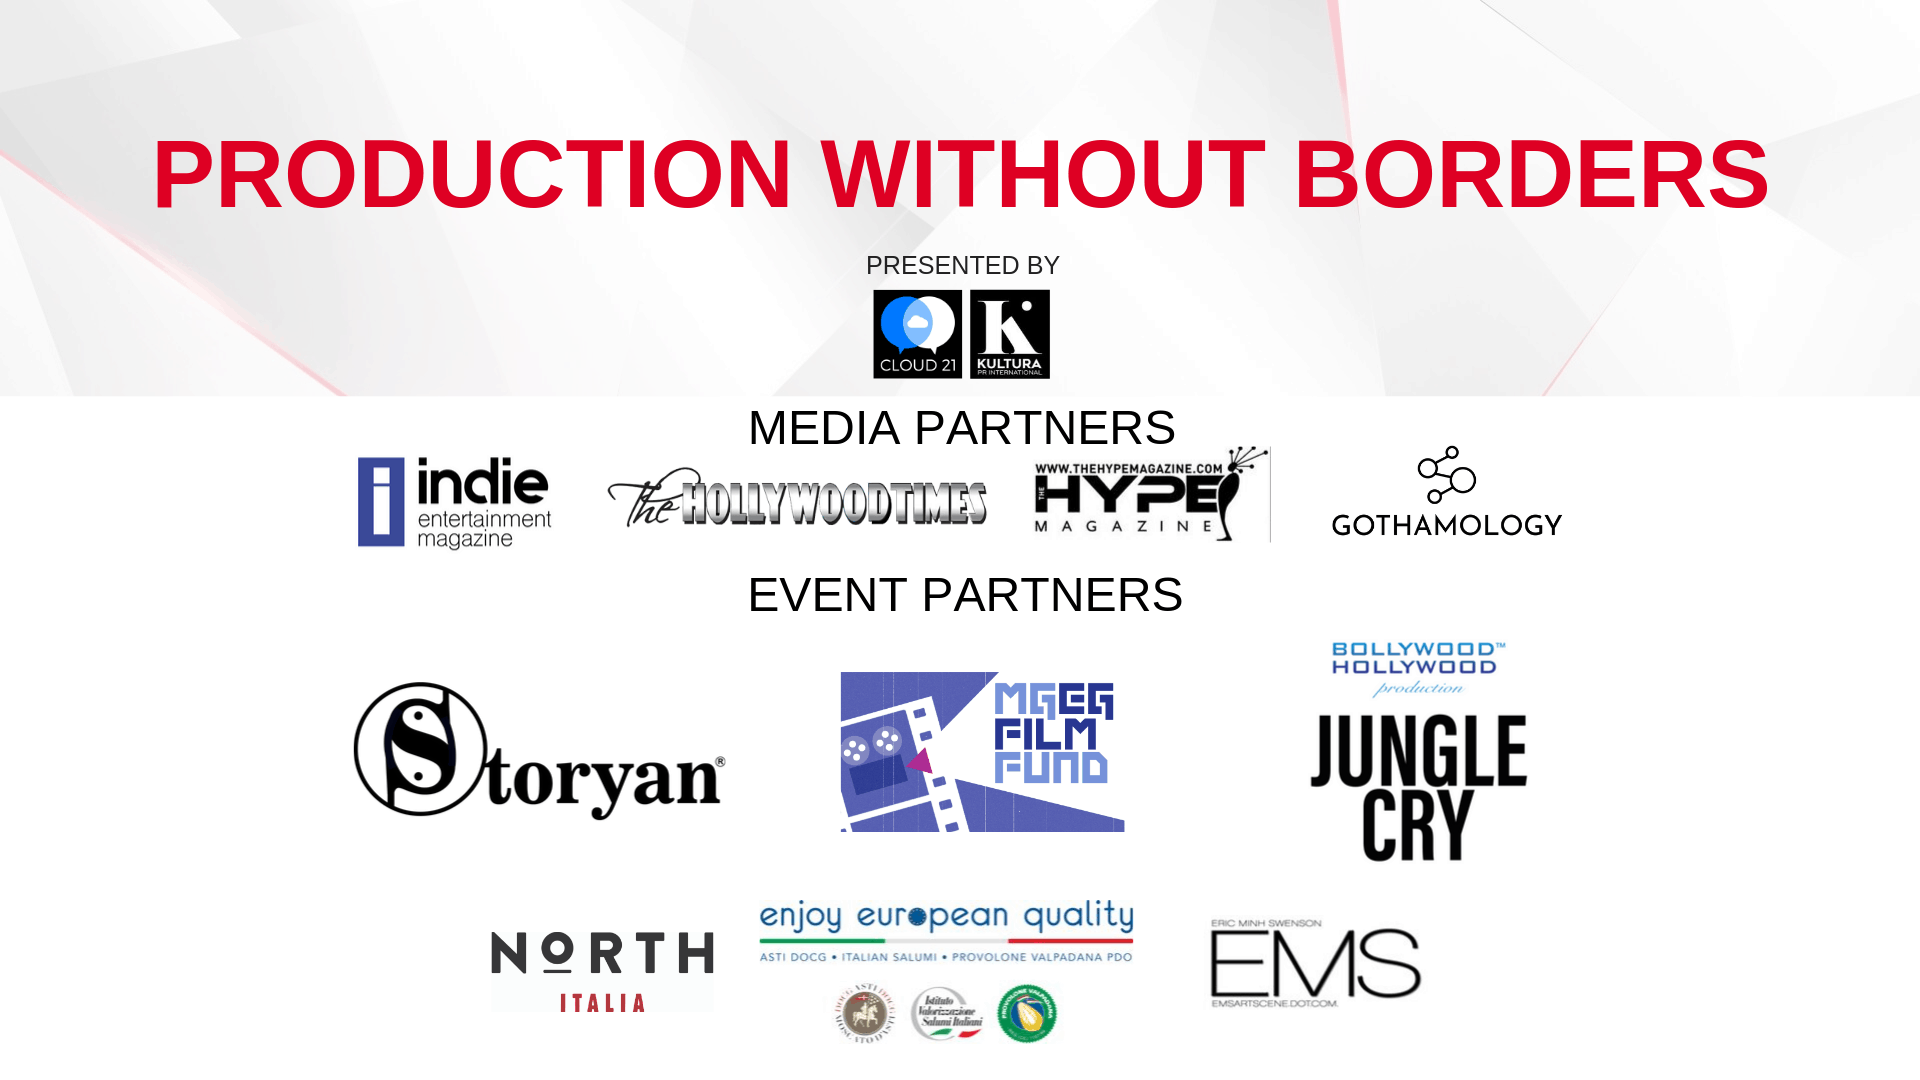 Production Without Borders 2019 during American Film Market - Santa Monica